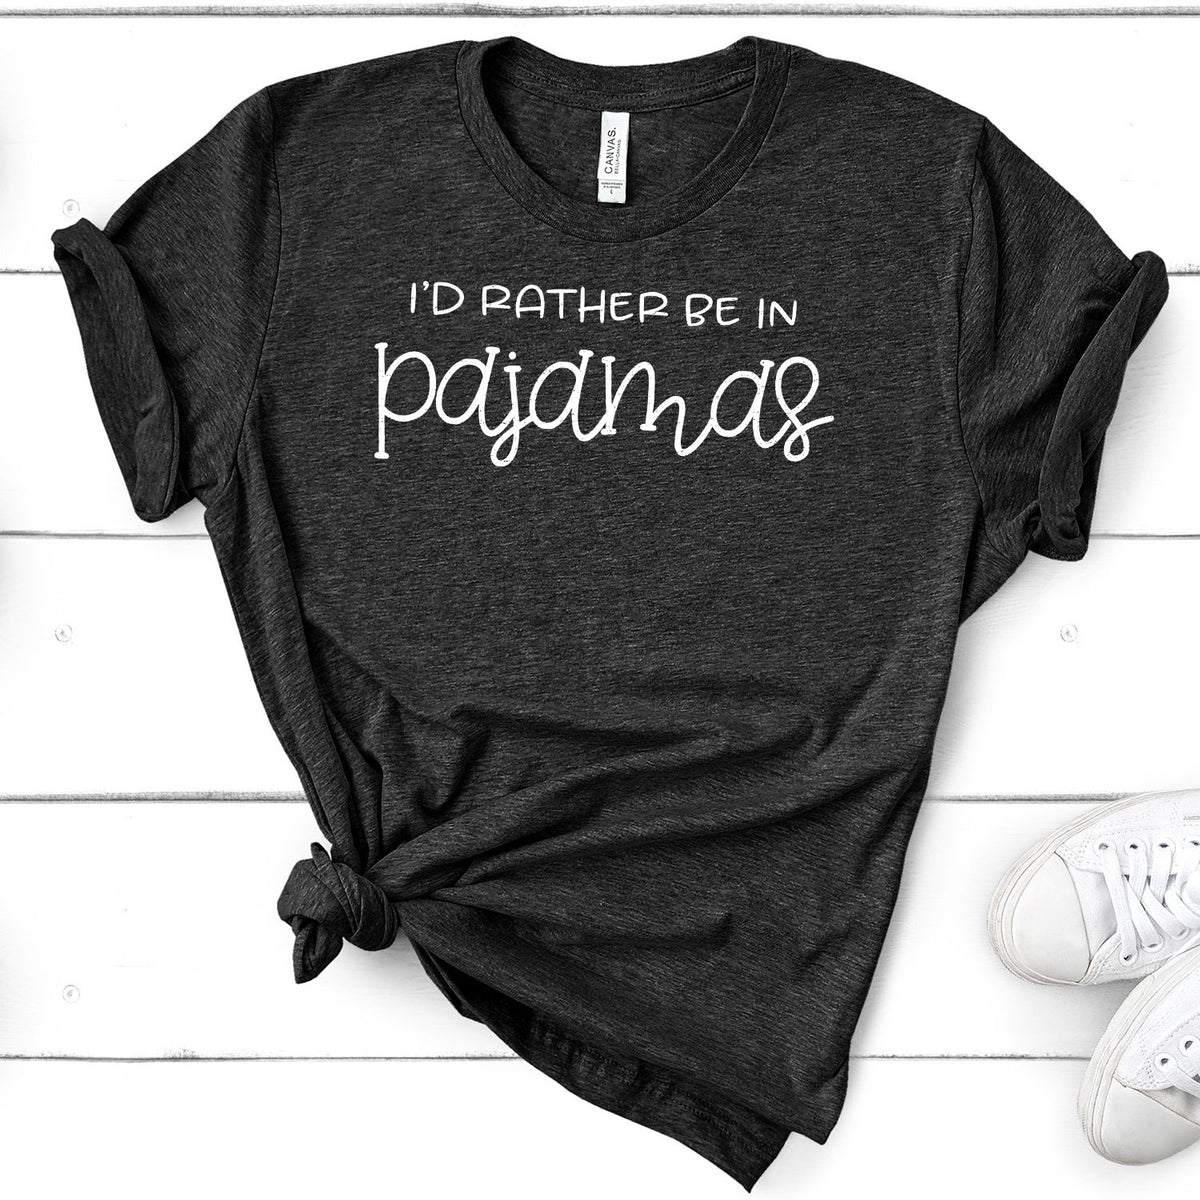 I&#39;d Rather Be in Pajamas - Short Sleeve Tee Shirt